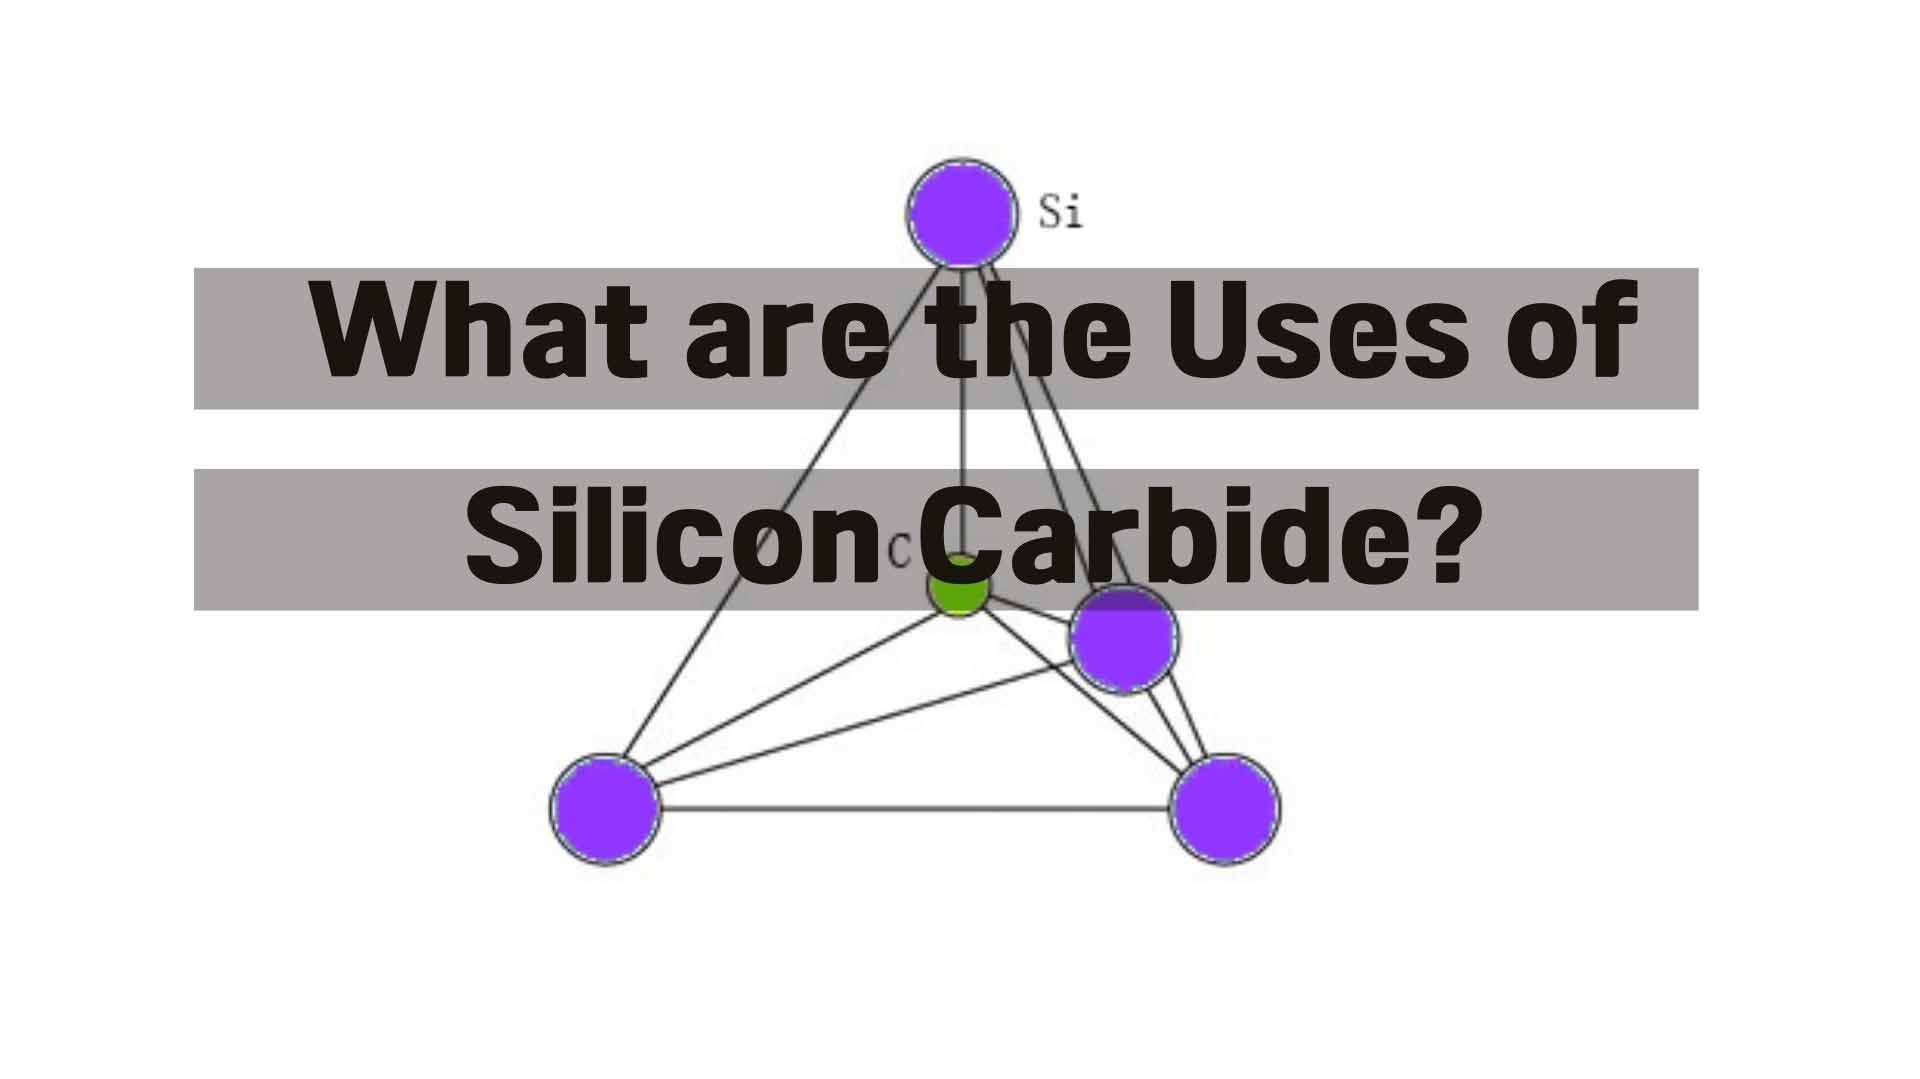 What are the Uses of Silicon Carbide